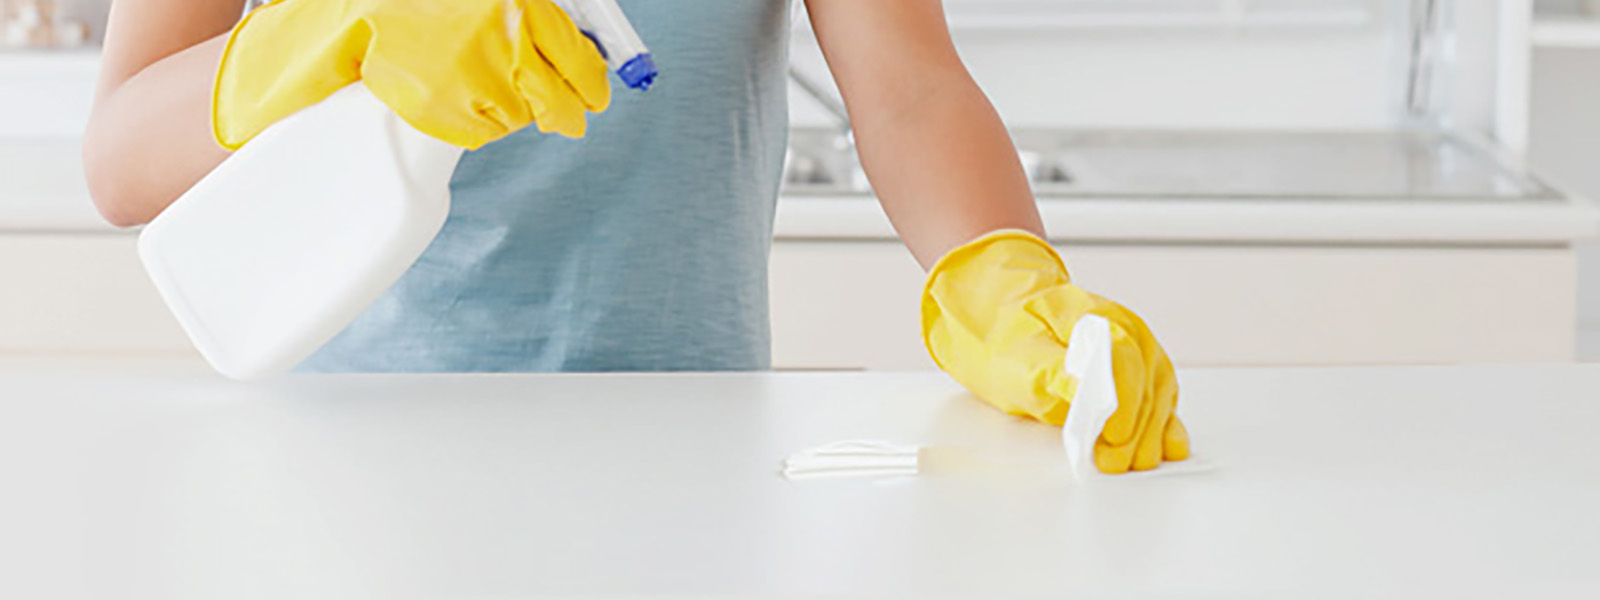 How to Clean Your Countertops